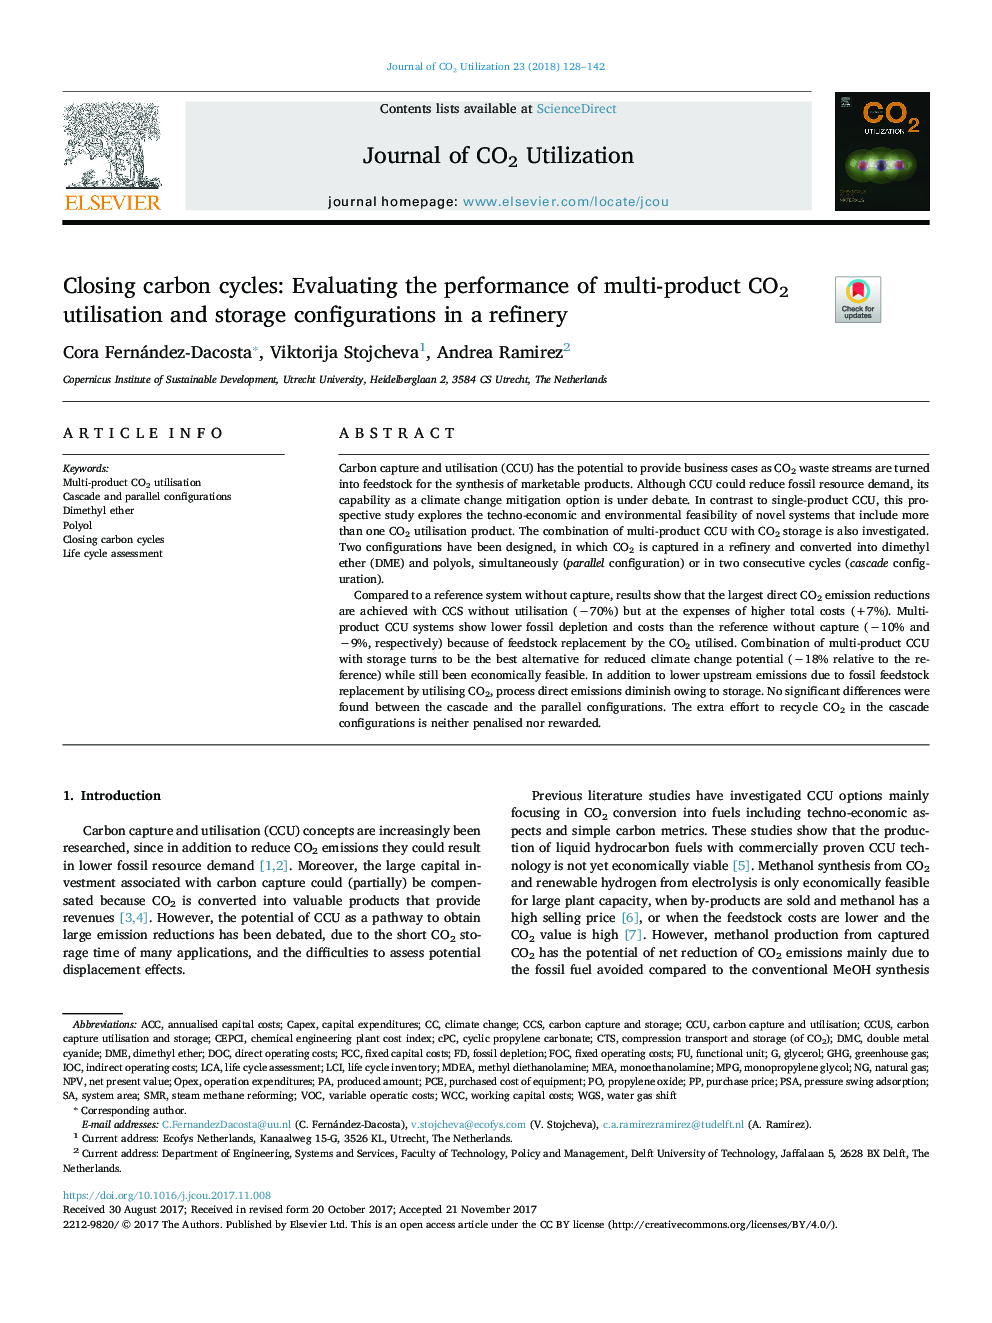 Closing carbon cycles: Evaluating the performance of multi-product CO2 utilisation and storage configurations in a refinery